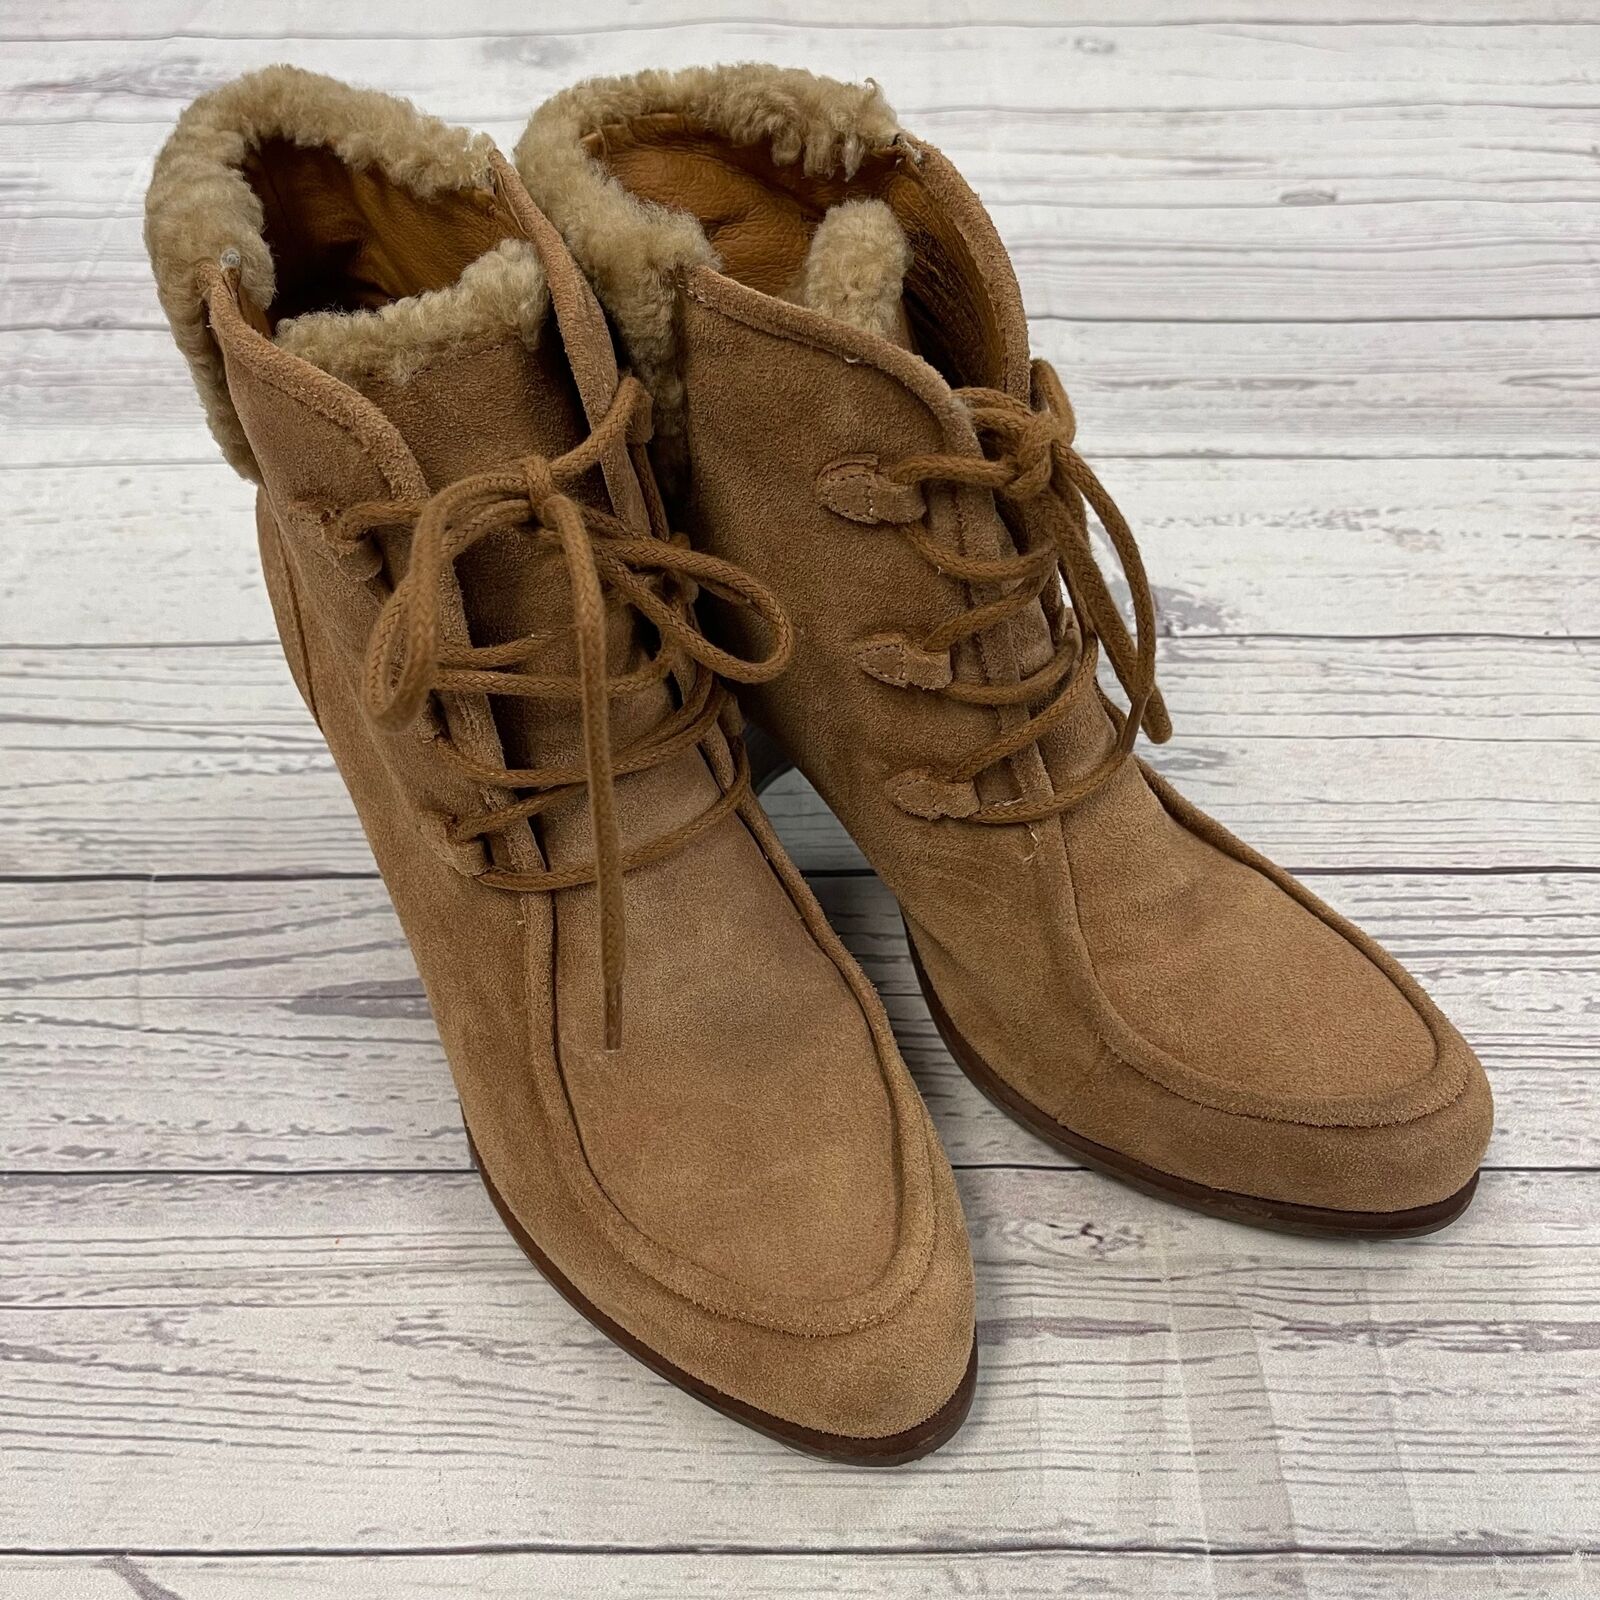 UGG Analise Lined Suede Sheepskin Chestnut Ankle Heel Boots Women’s Size 11